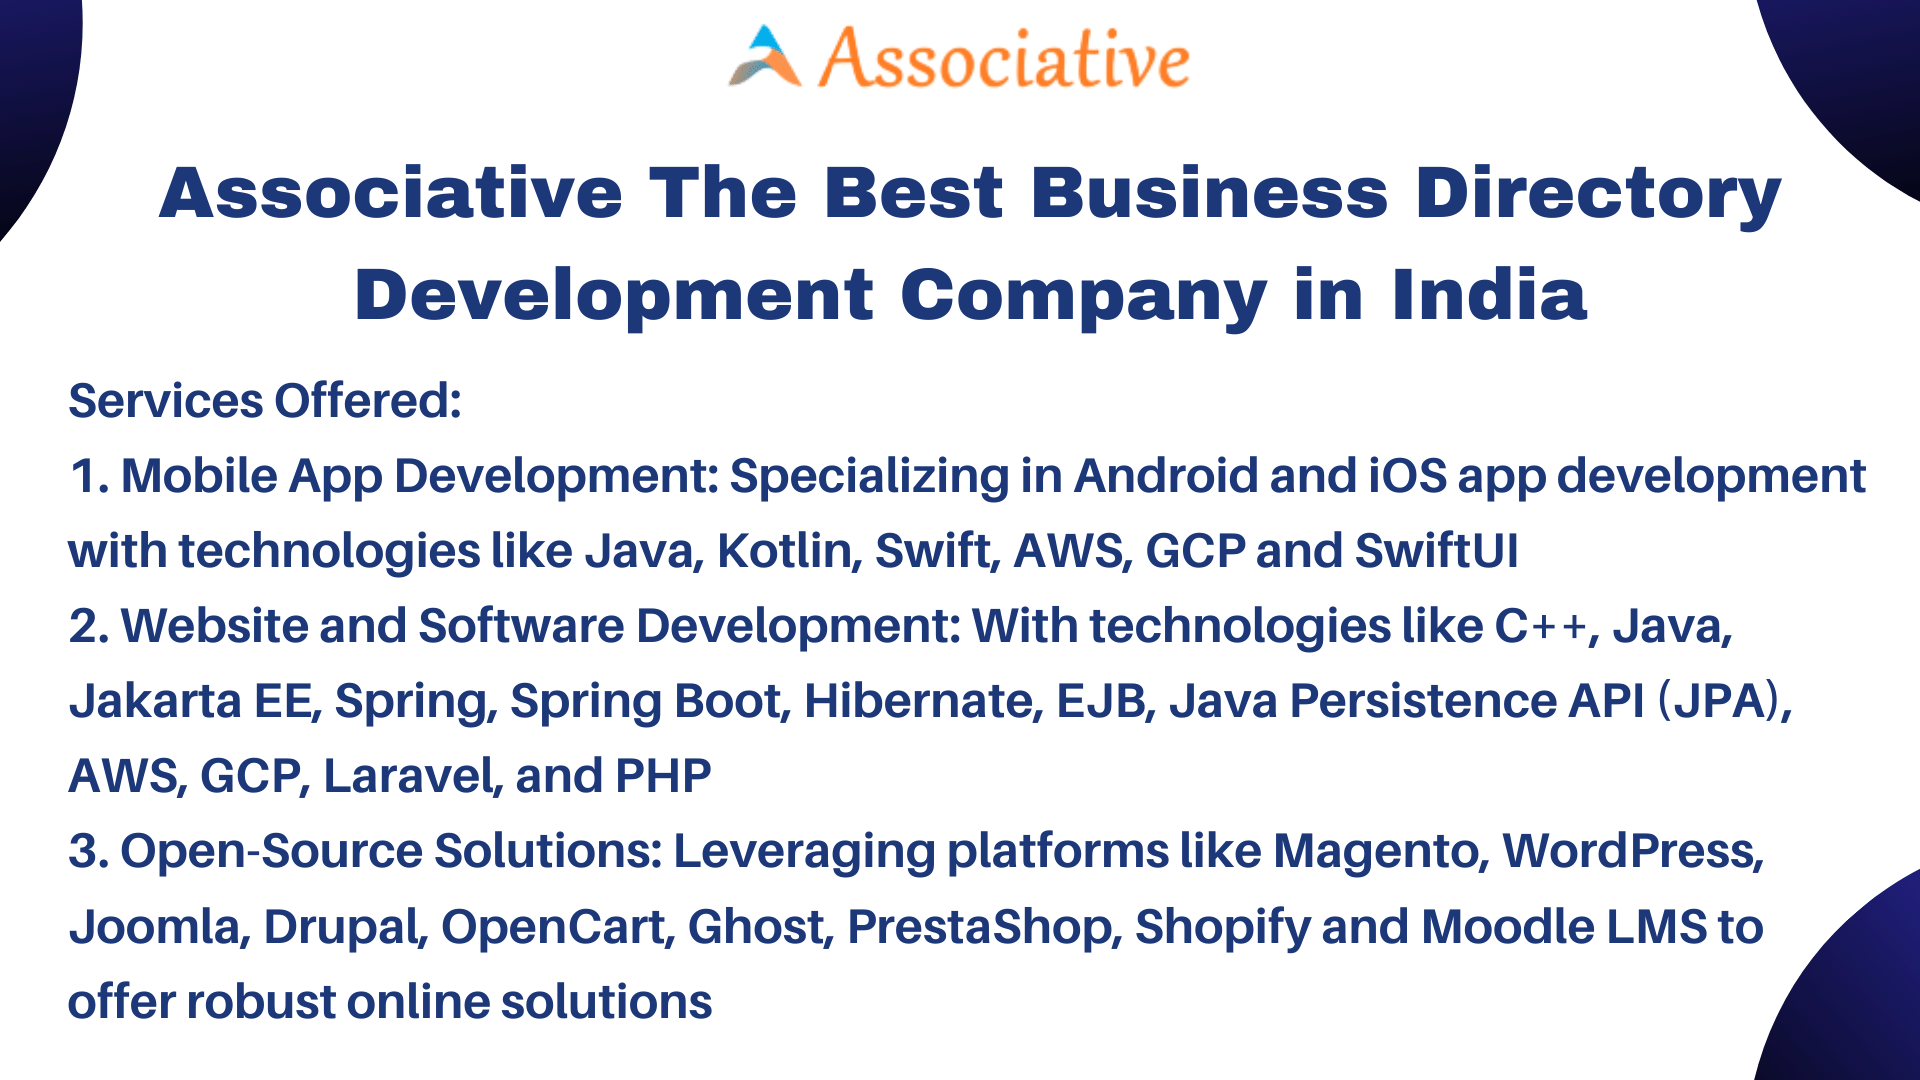 Associative The Best Business Directory Development Company in India